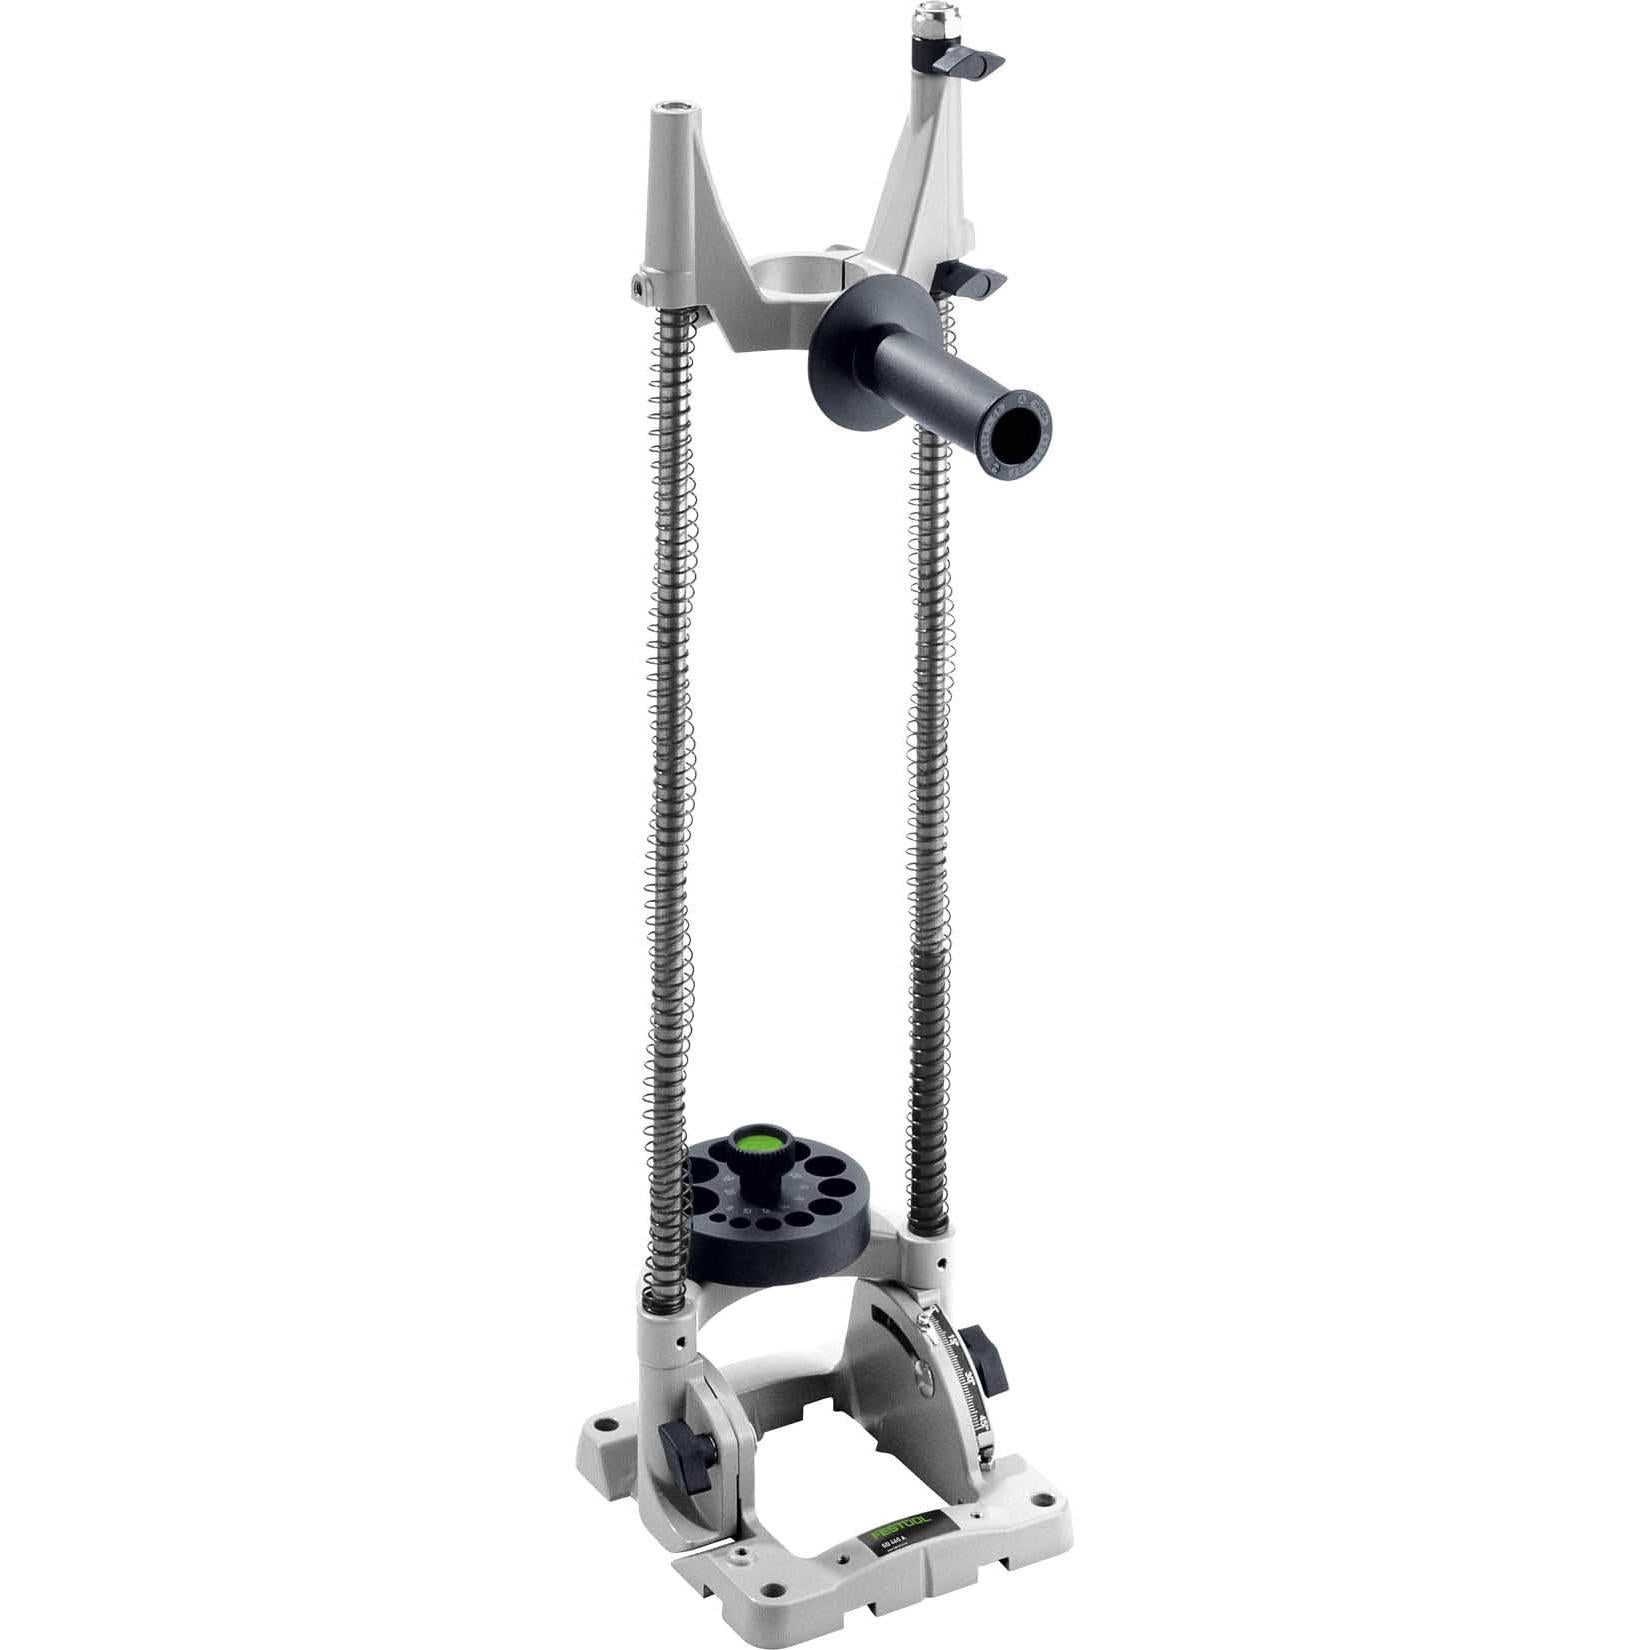 Festool Drill Stand FOR CARPENTRY GD 460 A 769042 Power Tool Services